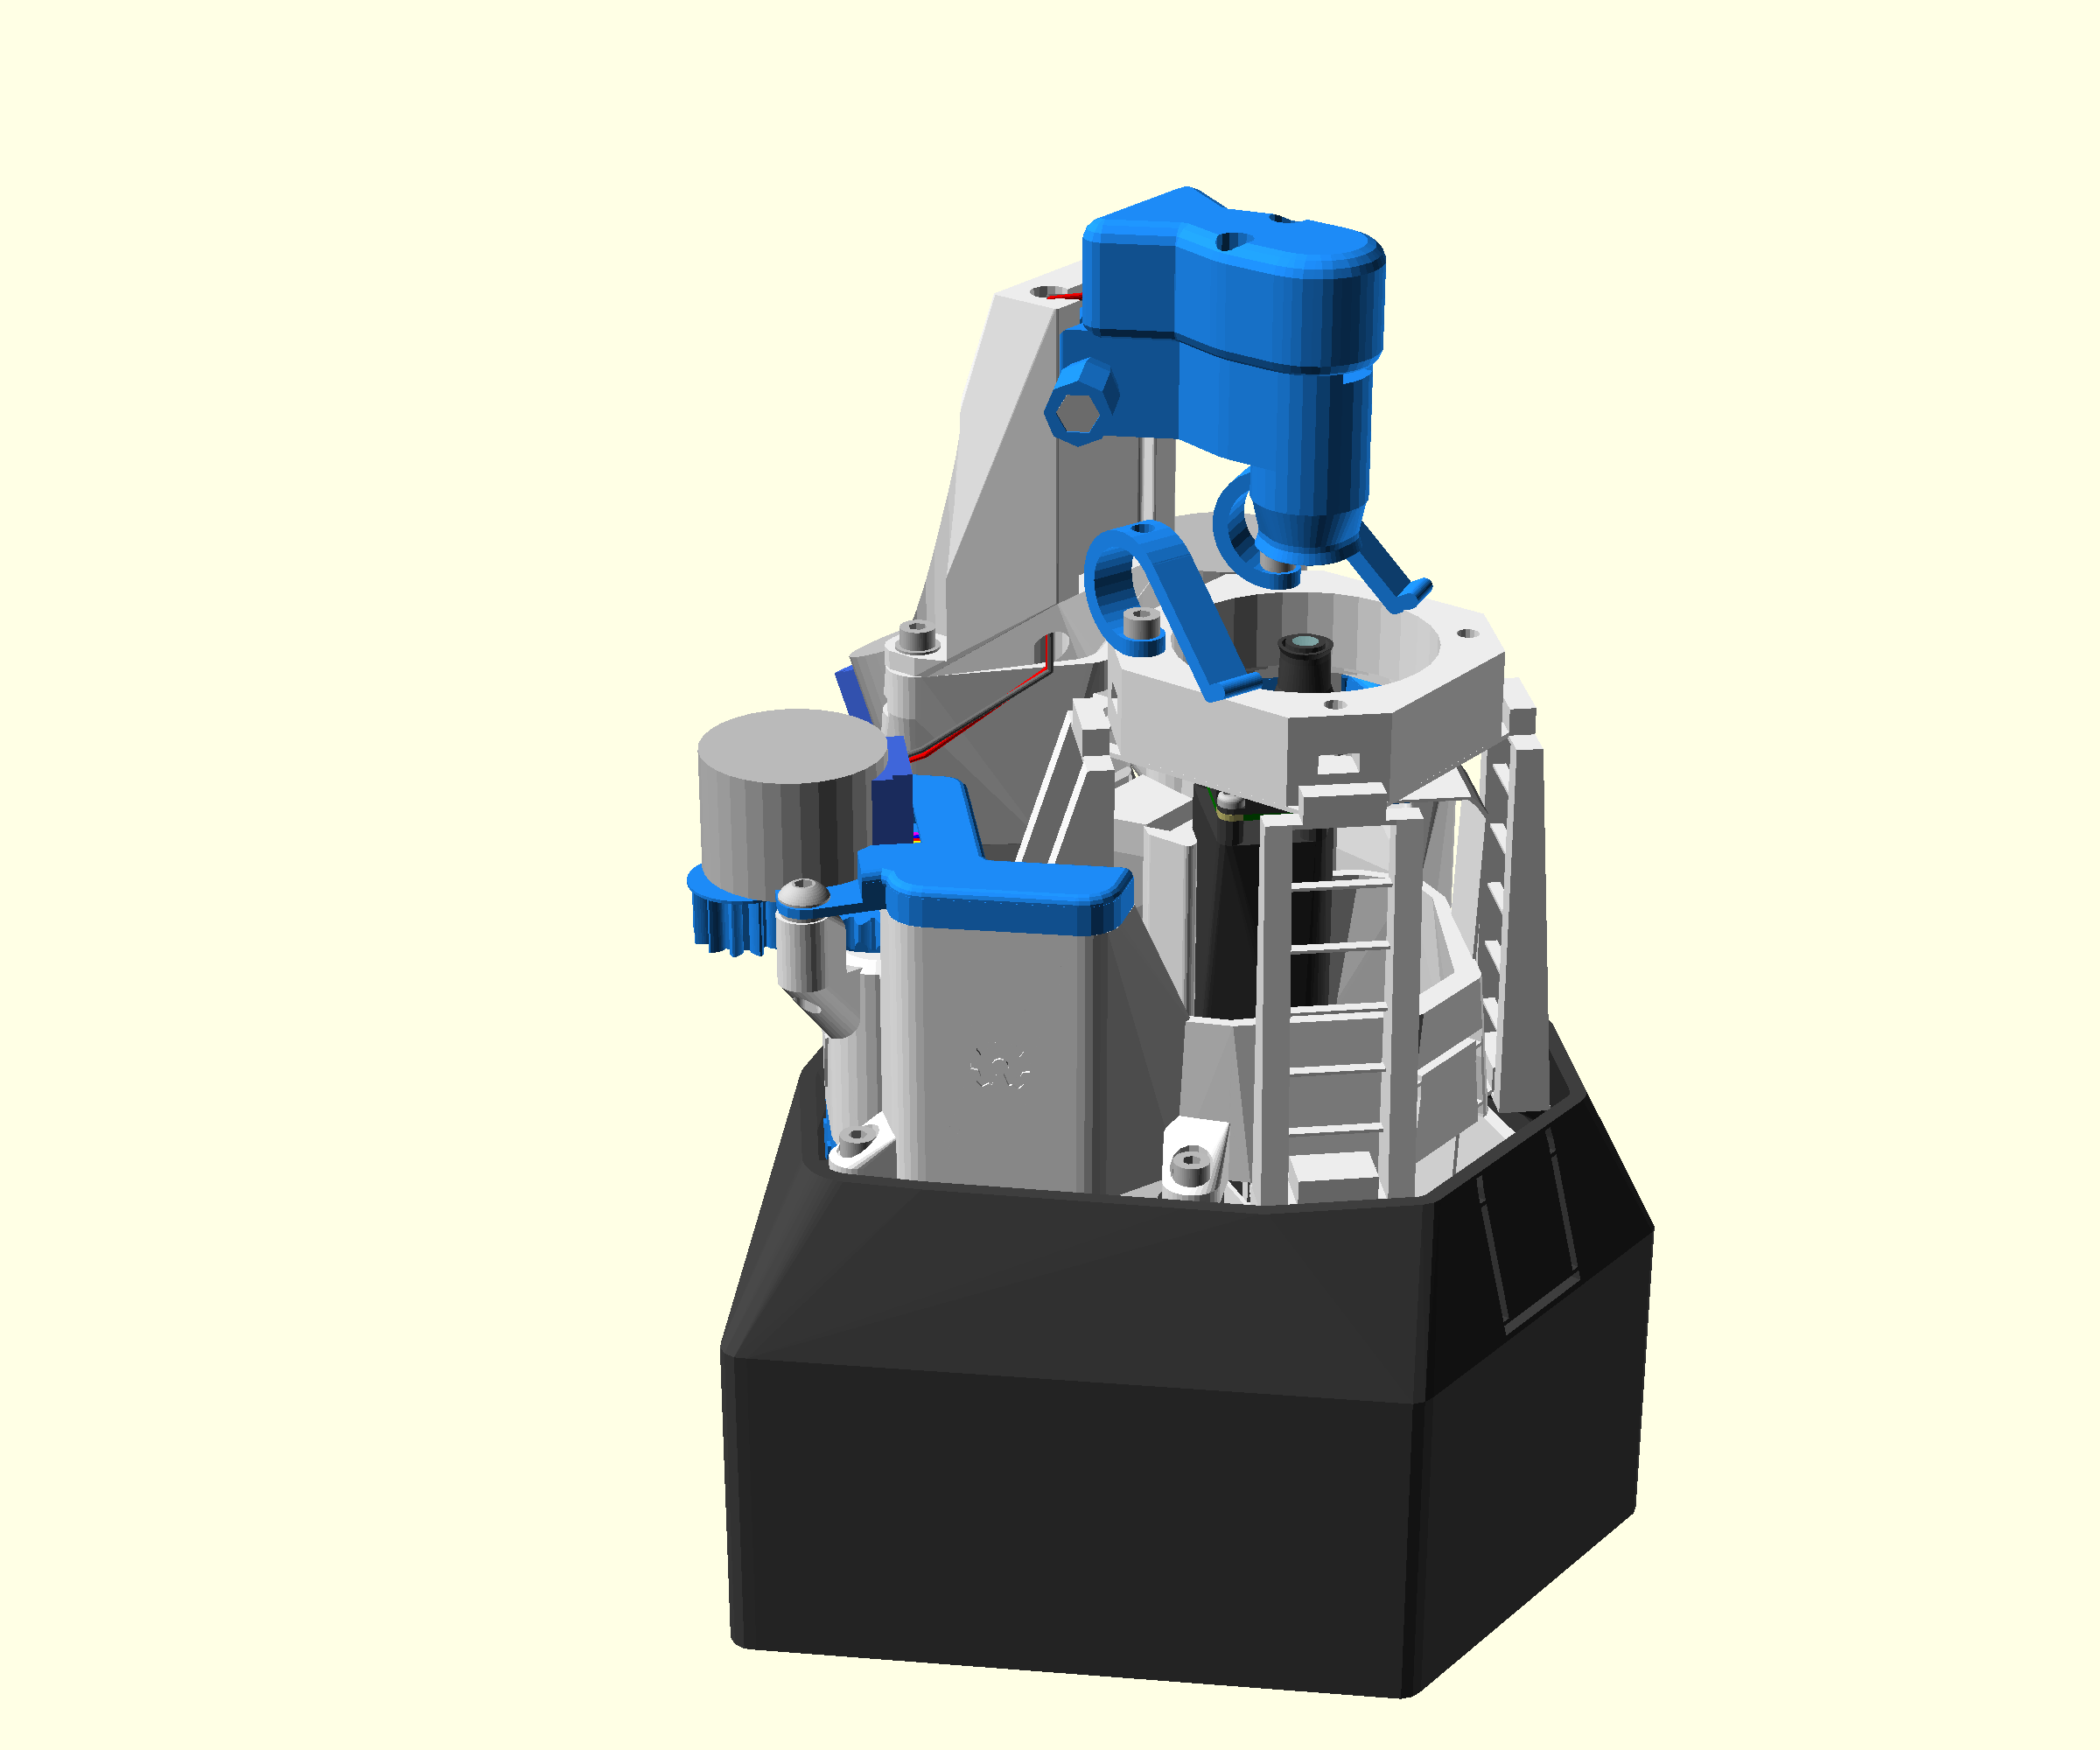 A render of the completed microscope using the Raspberry Pi camera module's lens.